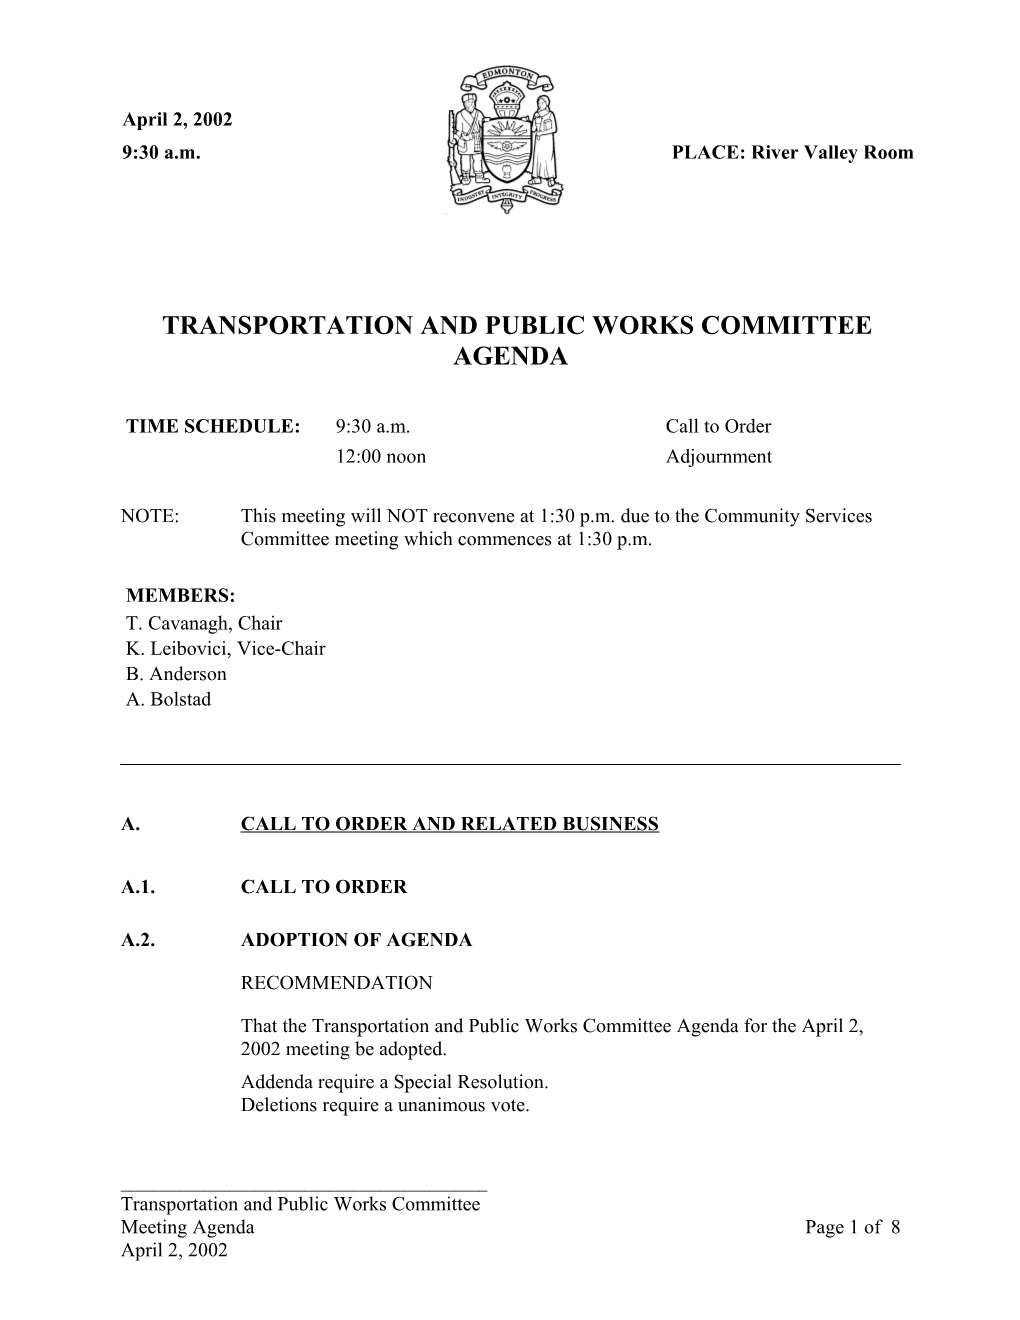 Agenda for Transportation and Public Works Committee April 2, 2002 Meeting